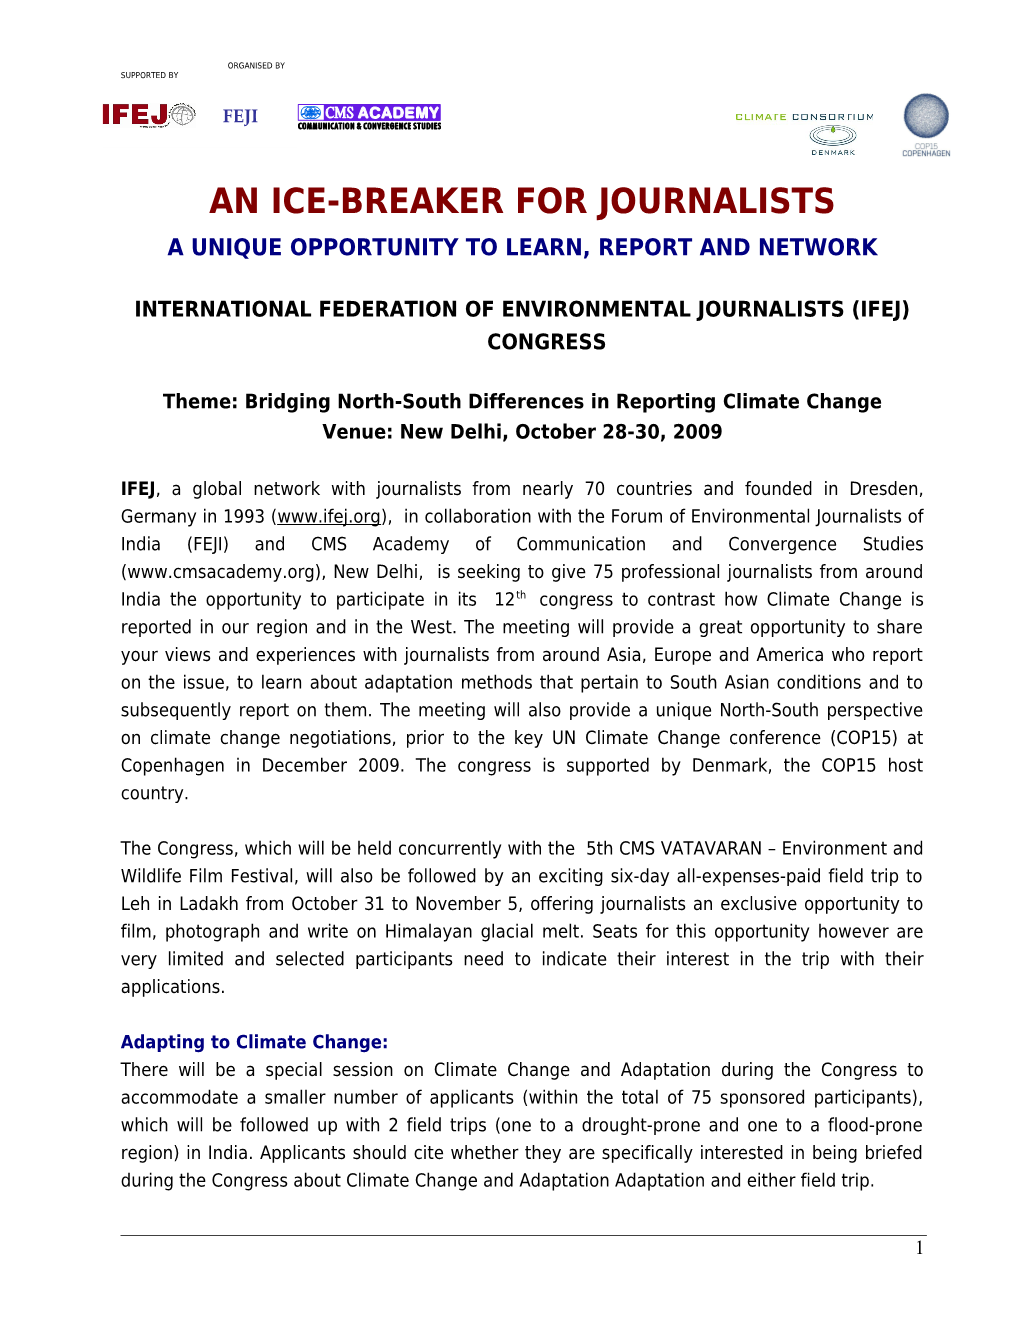 Heading: an Ice-Breaker for Journalists